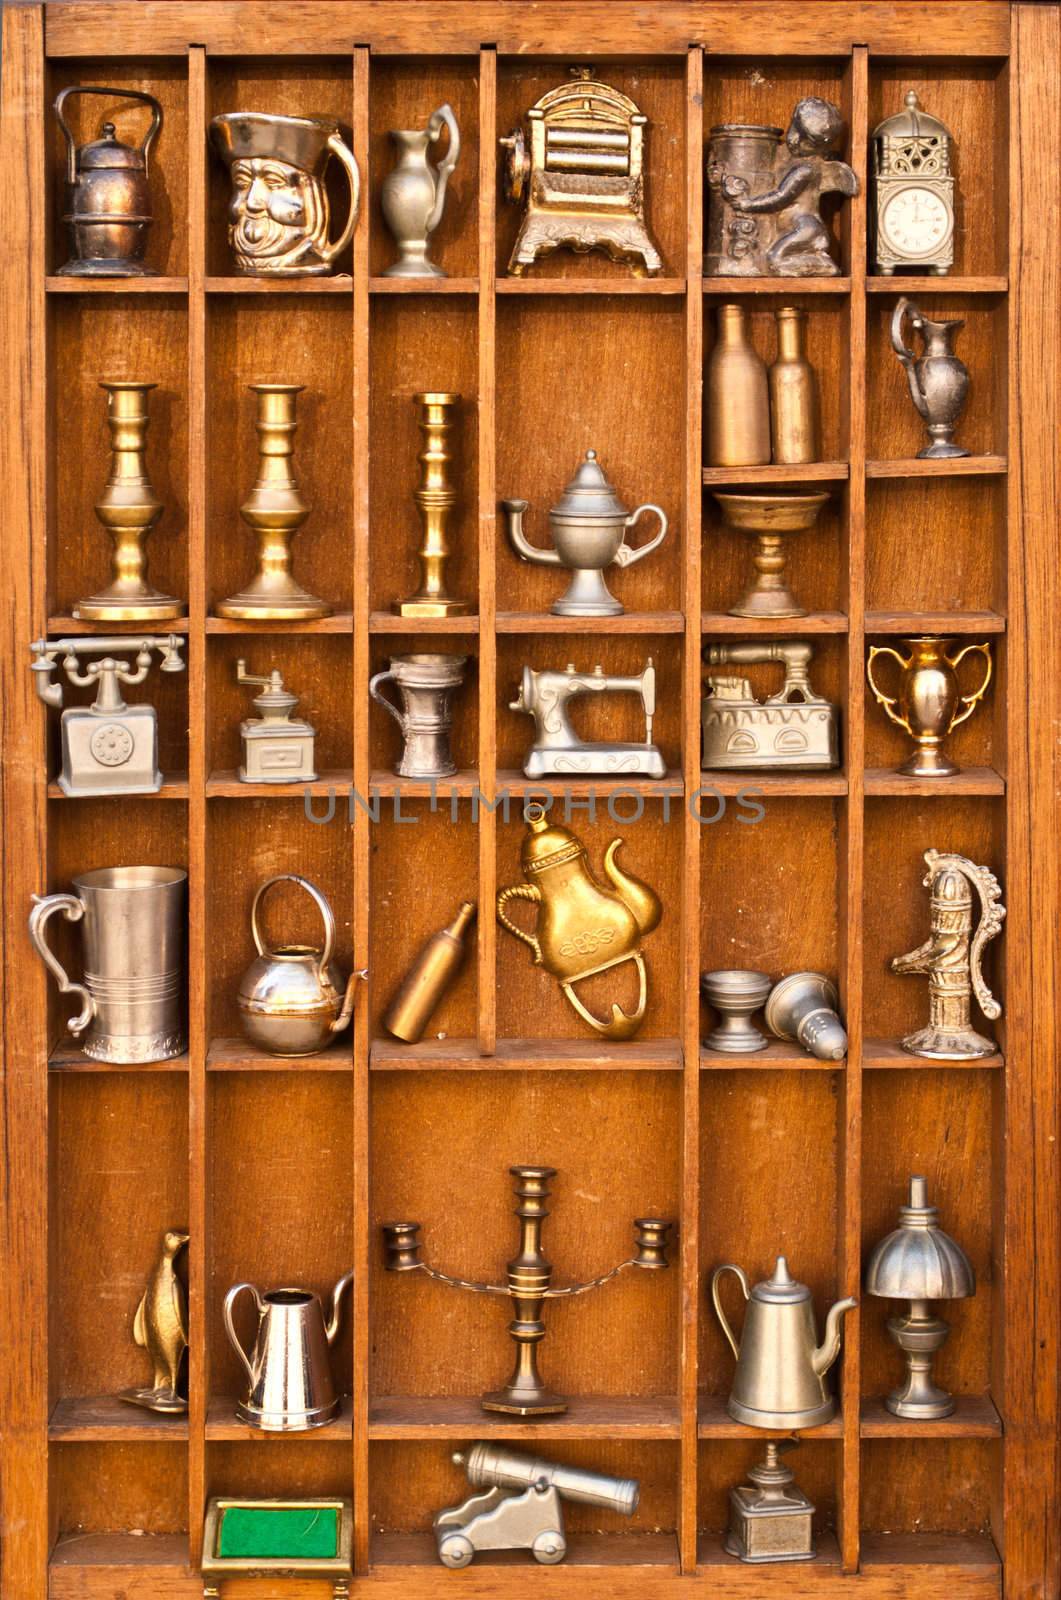 Antiques shelf in portrait mode by robertblaga